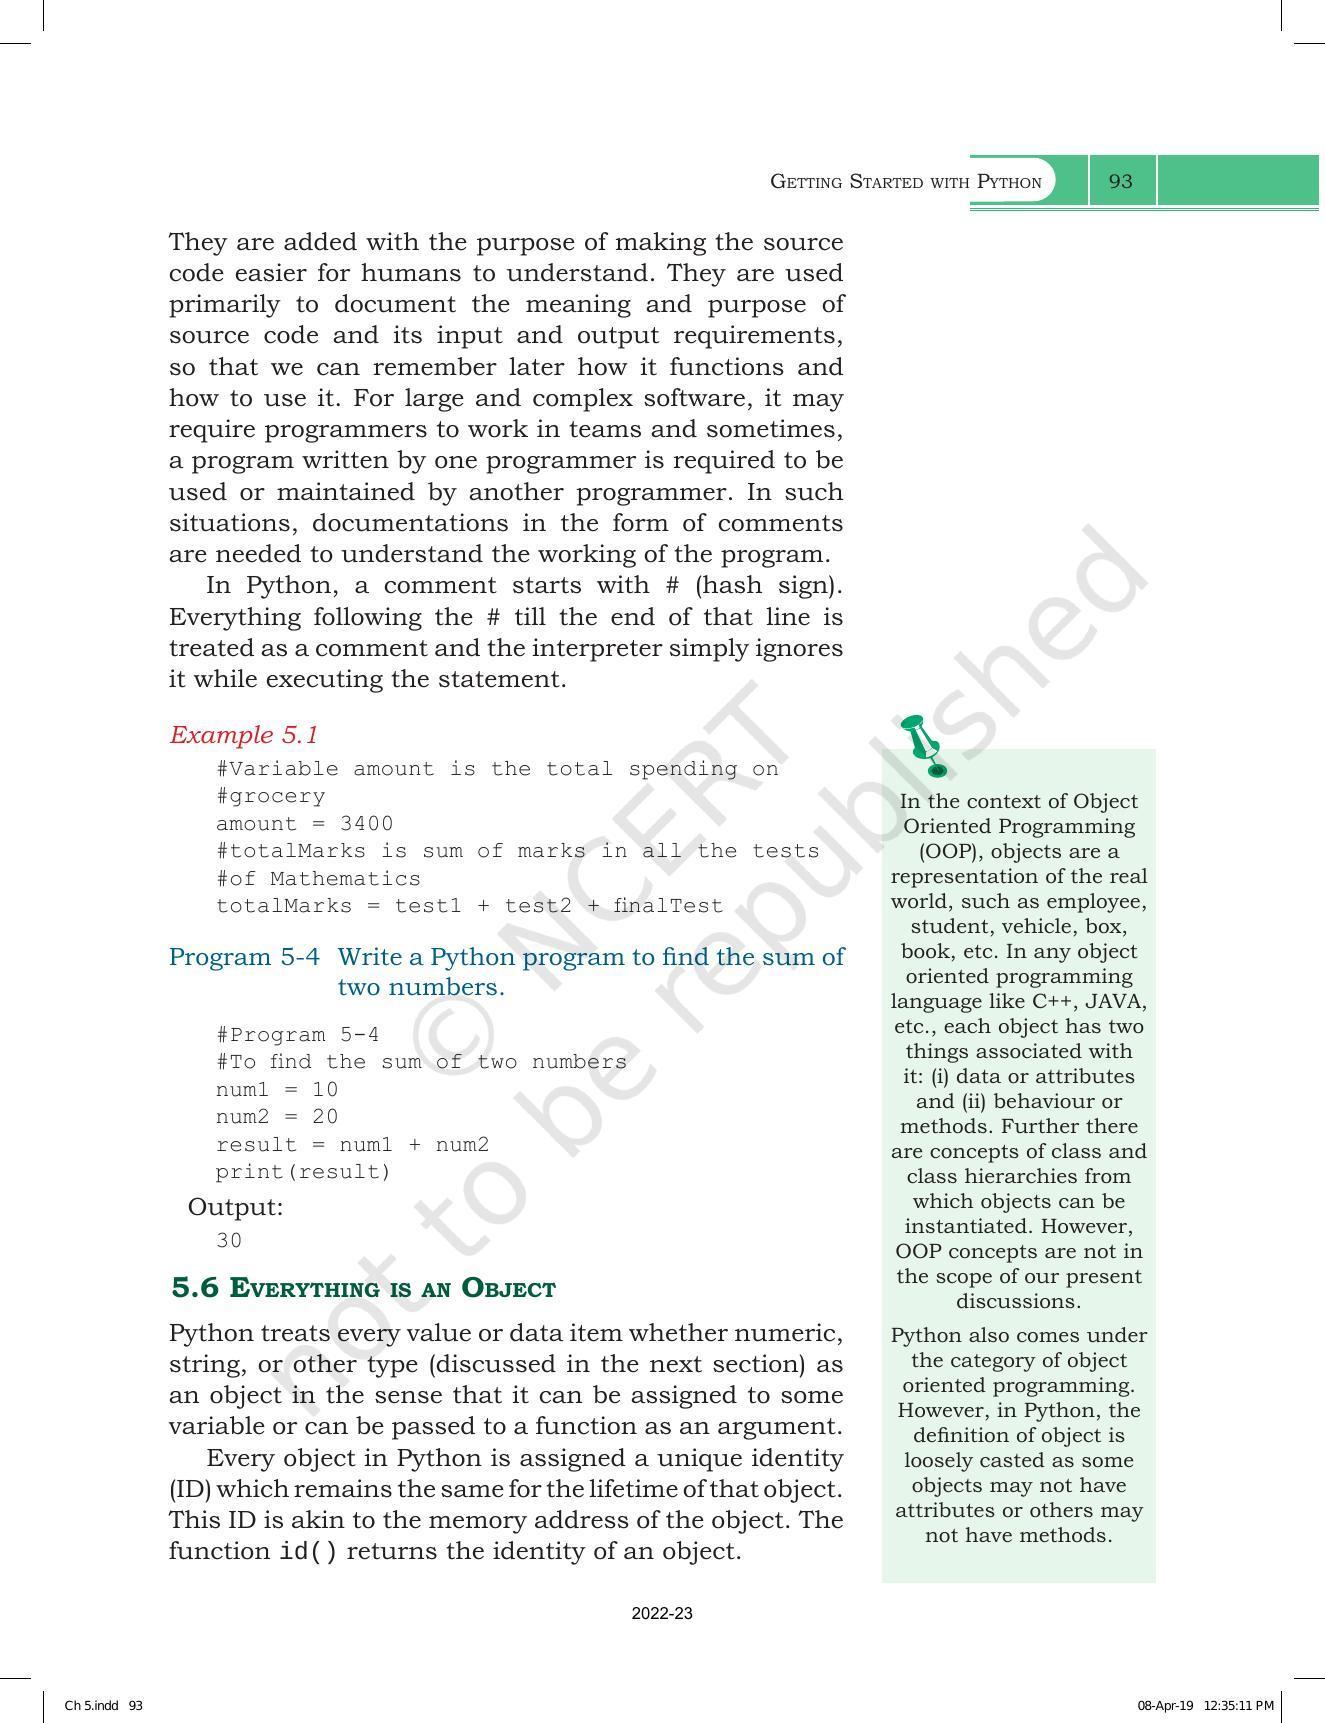 NCERT Book for Class 11 Computer Science Chapter 5 Getting Started with Python - Page 7